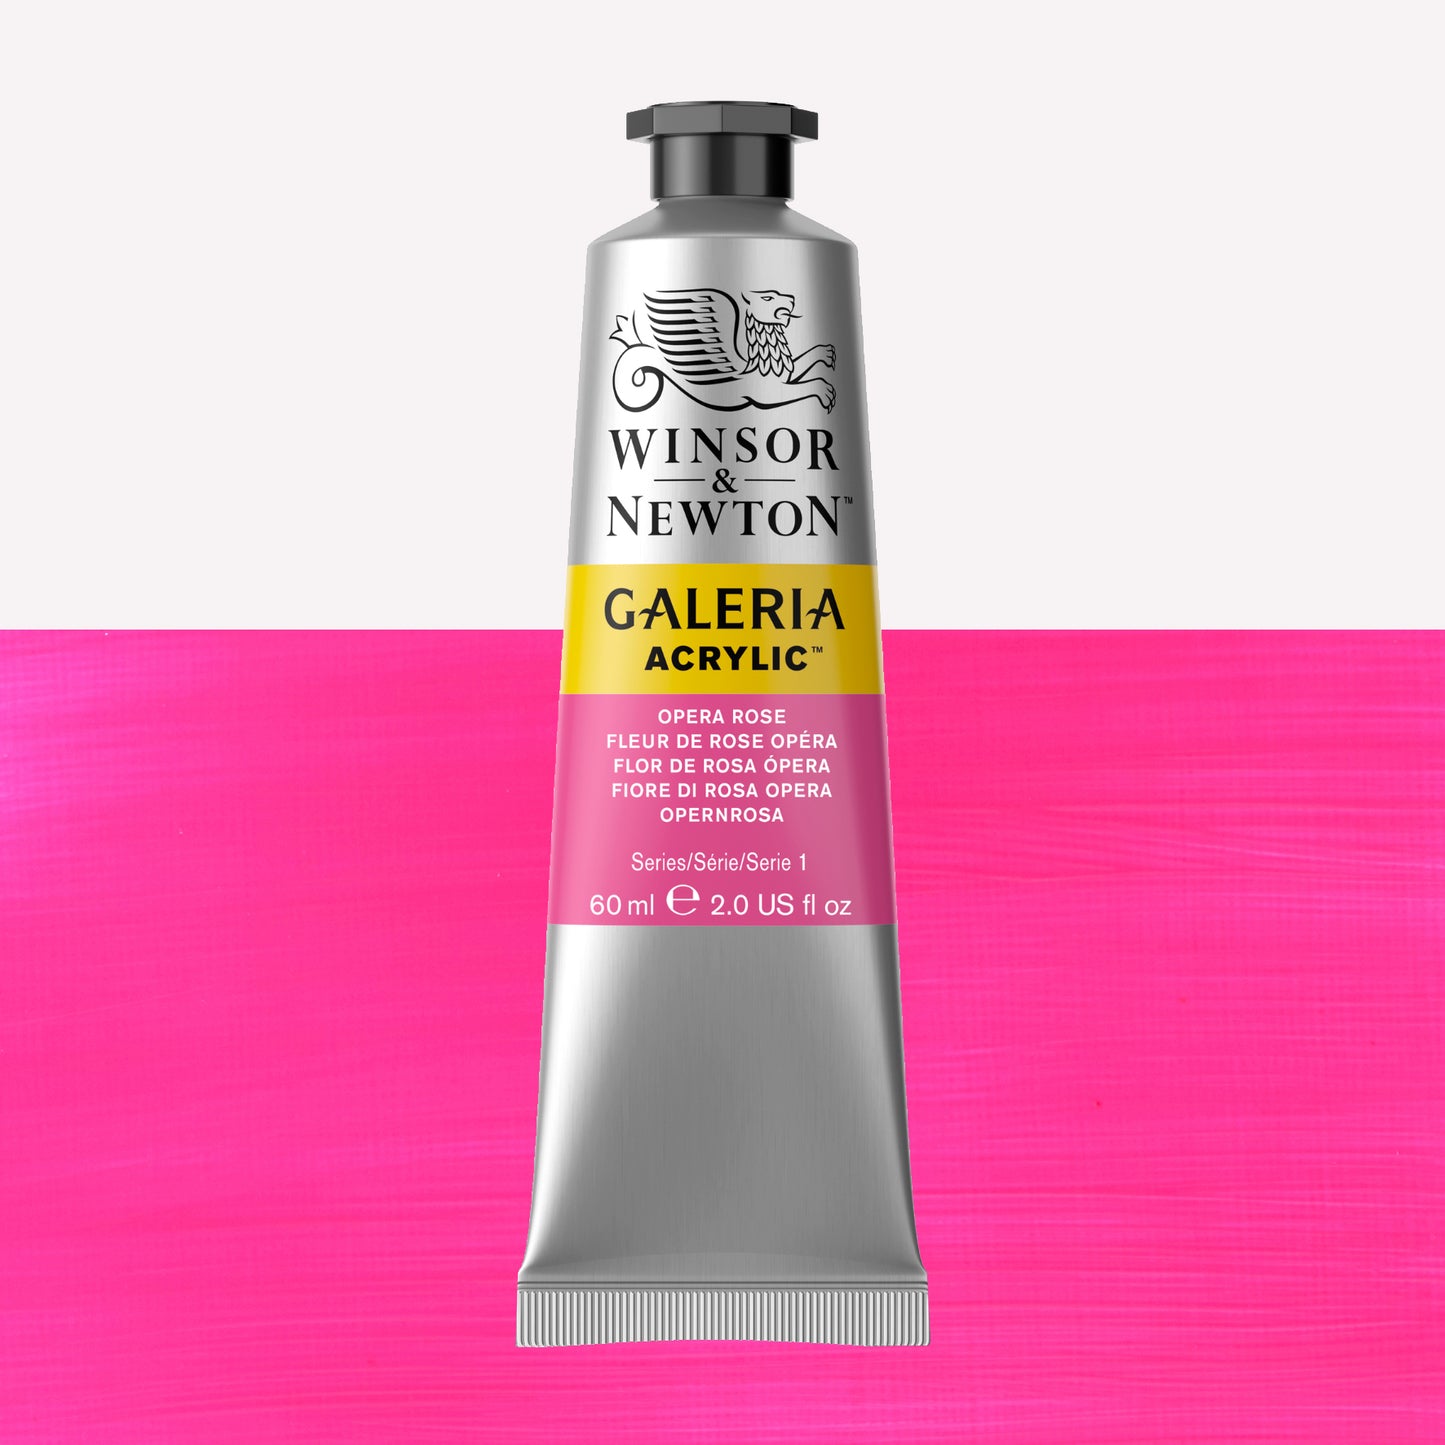 A 60ml tube of vibrant Galeria Acrylic paint in the shade Opera Rose. This professional-quality paint is packaged in a silver tube with a black lid. Made by Winsor and Newton